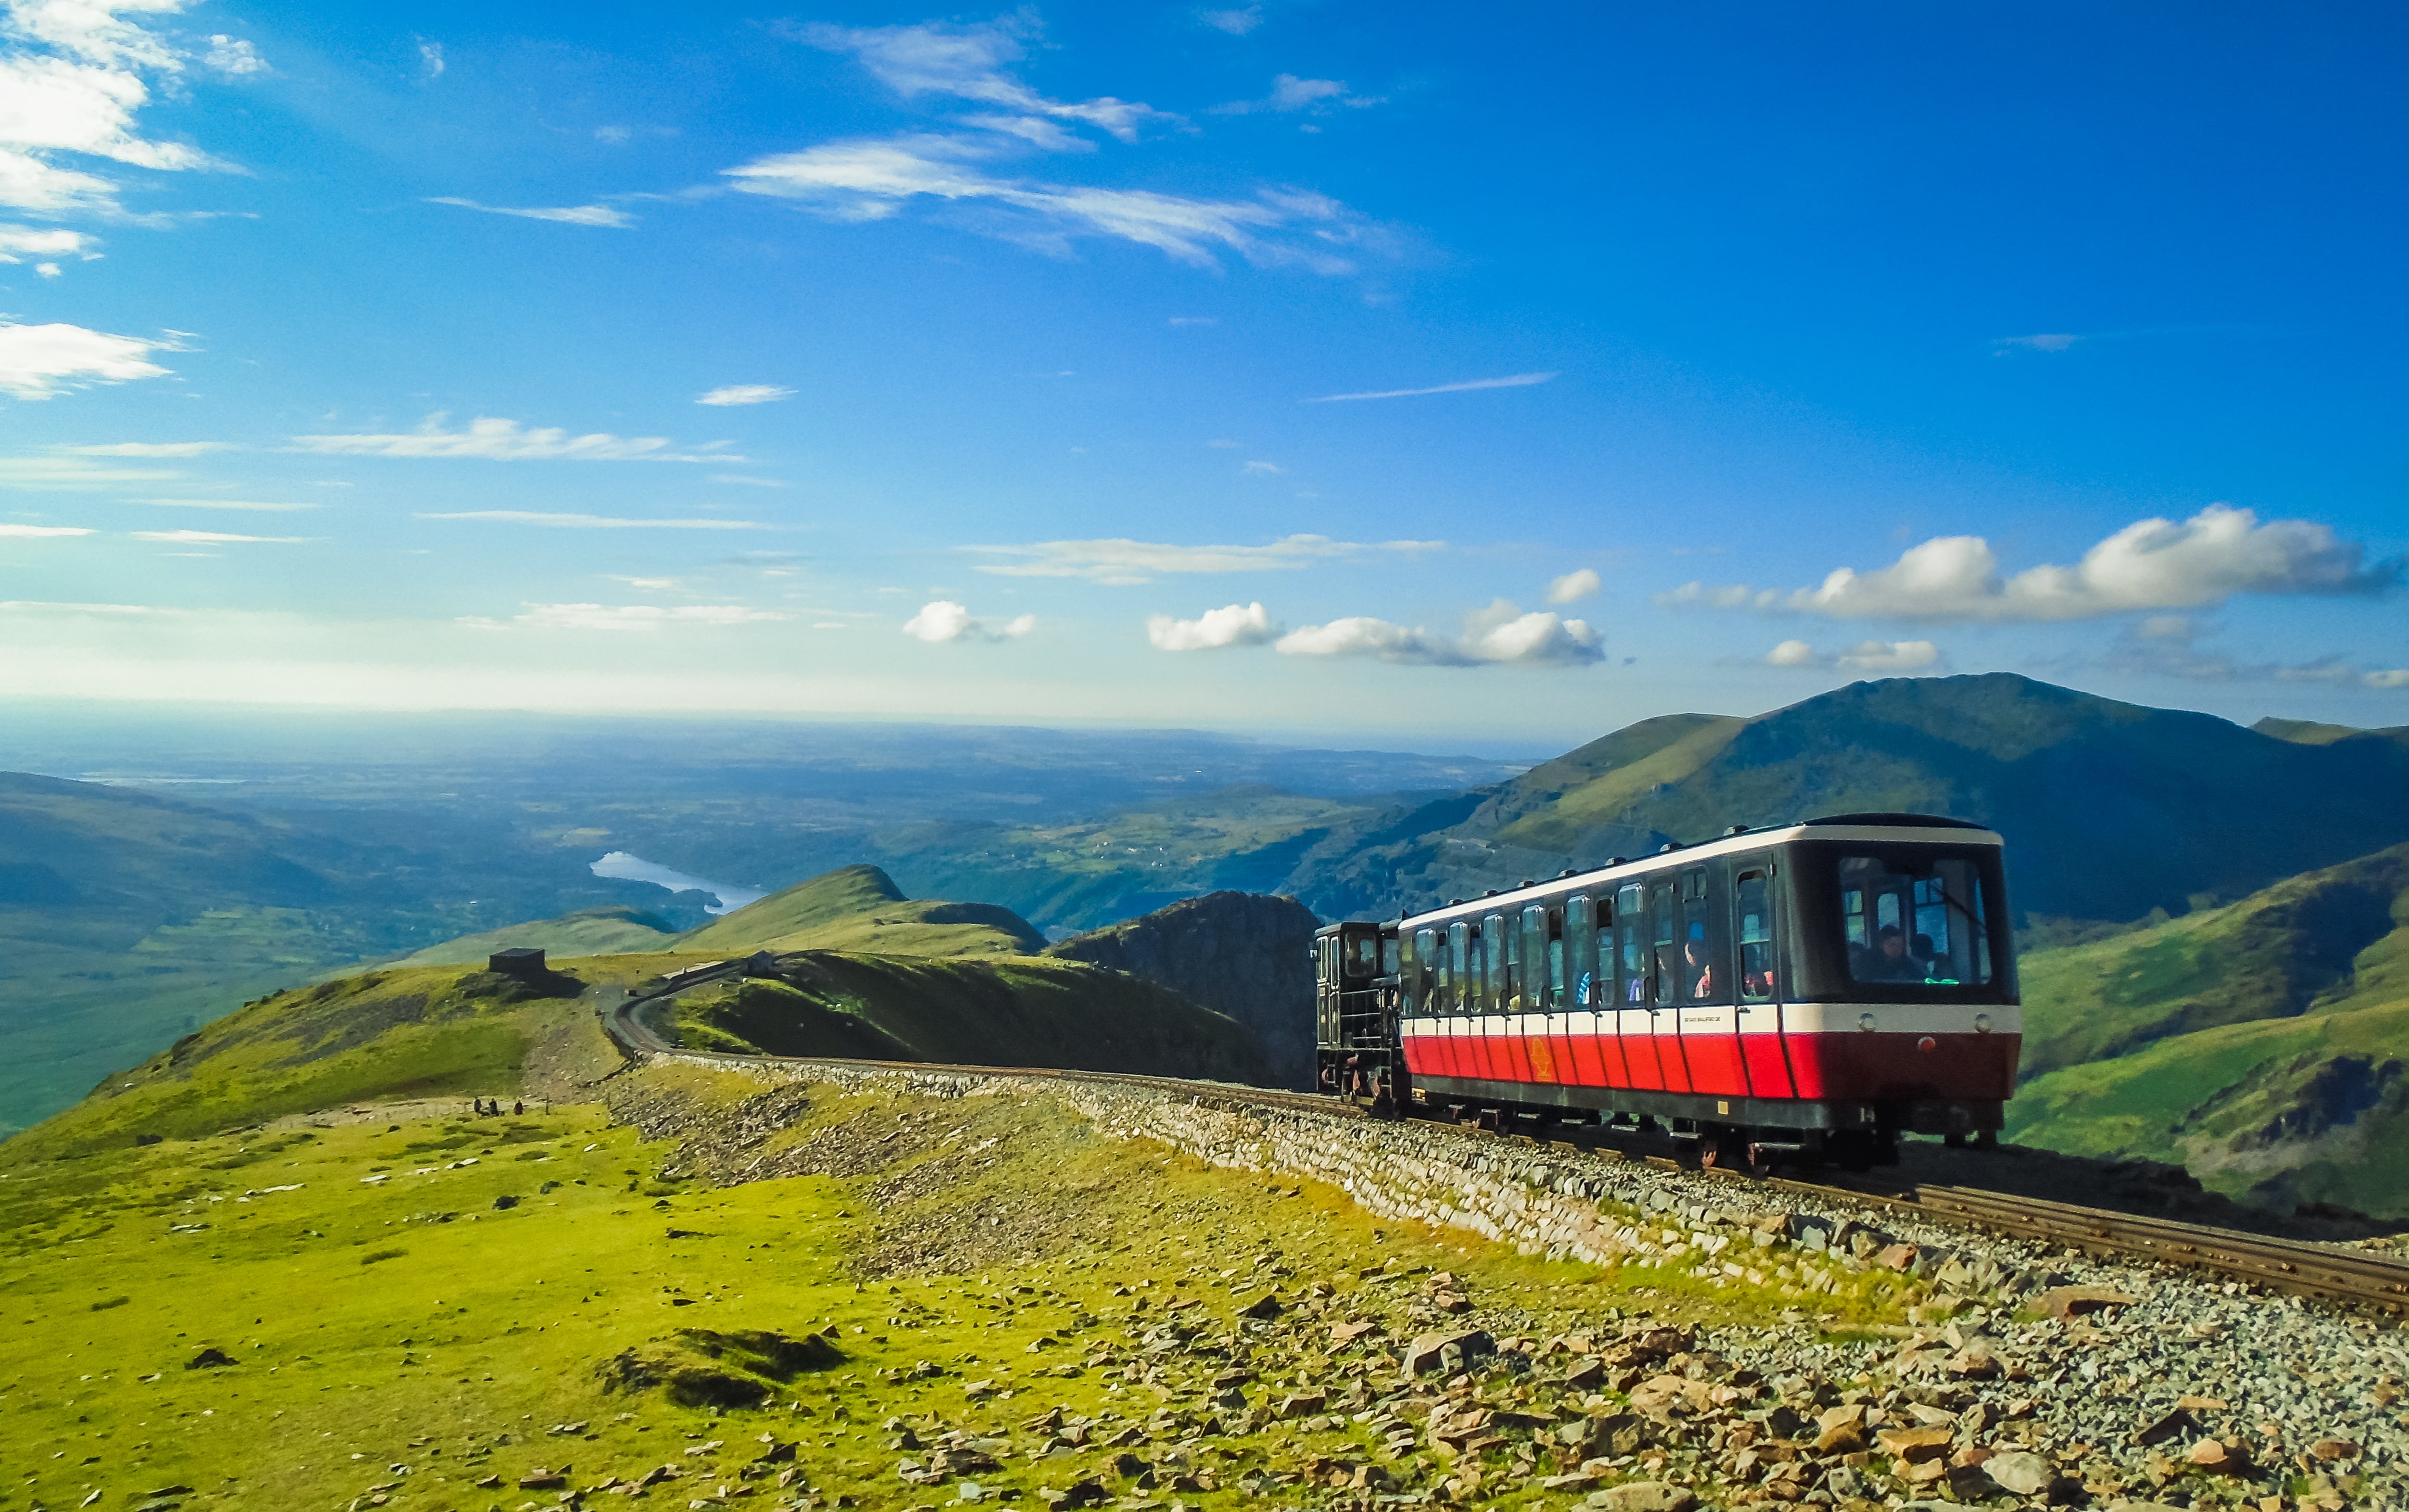 A small train journeying from the Snowdon summit on the llanberis path